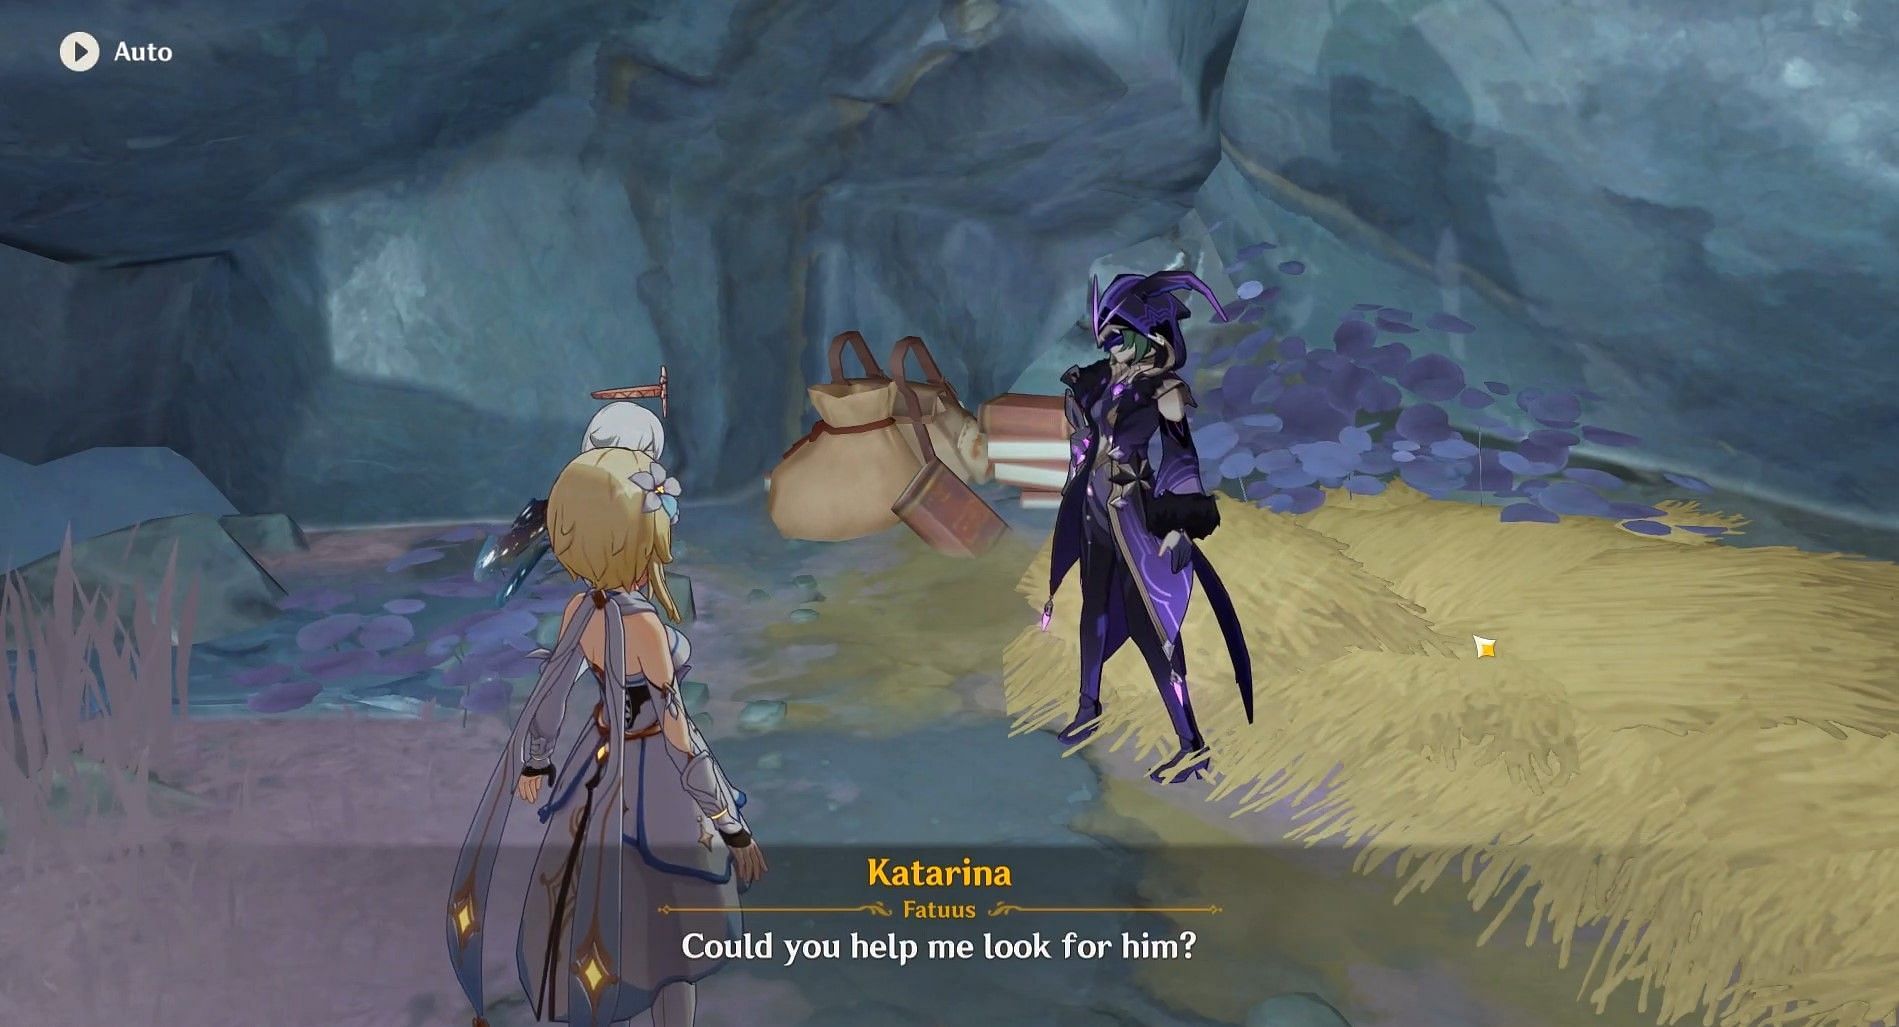 The player talking to Katarina once again in the same encampment (Image via miHoYo)